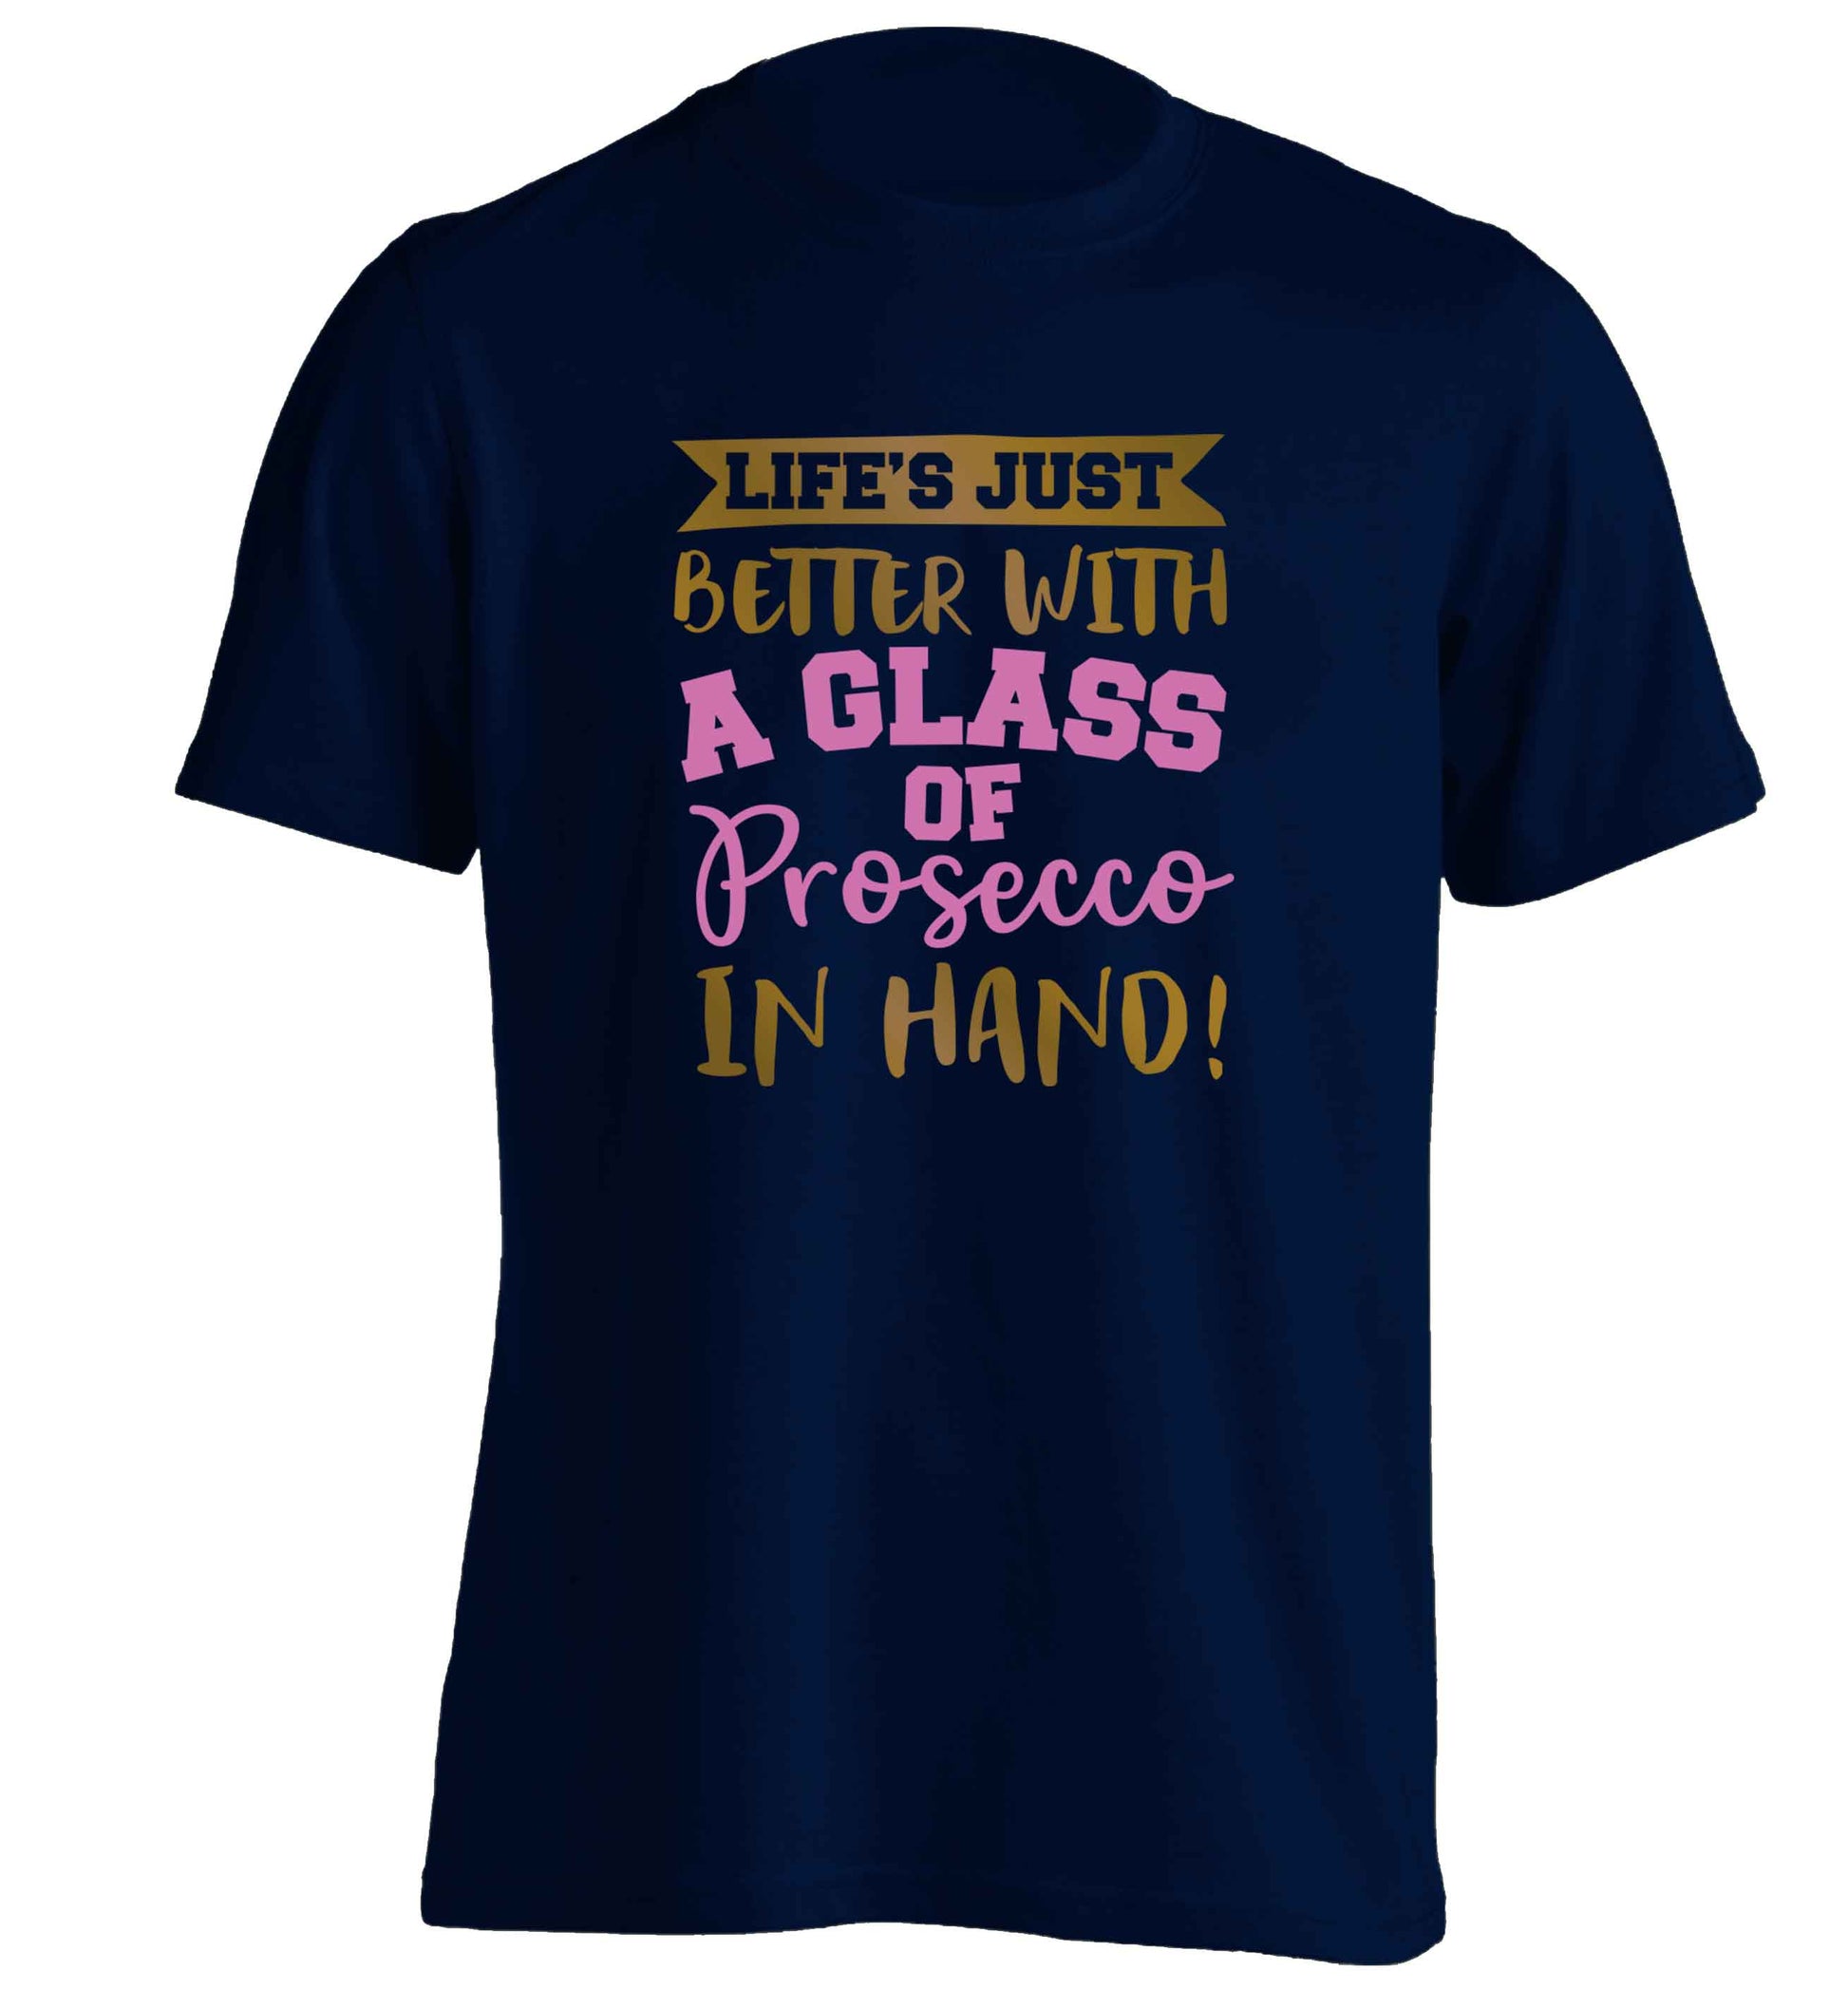 Life's just better with a glass of prosecco in hand adults unisex navy Tshirt 2XL